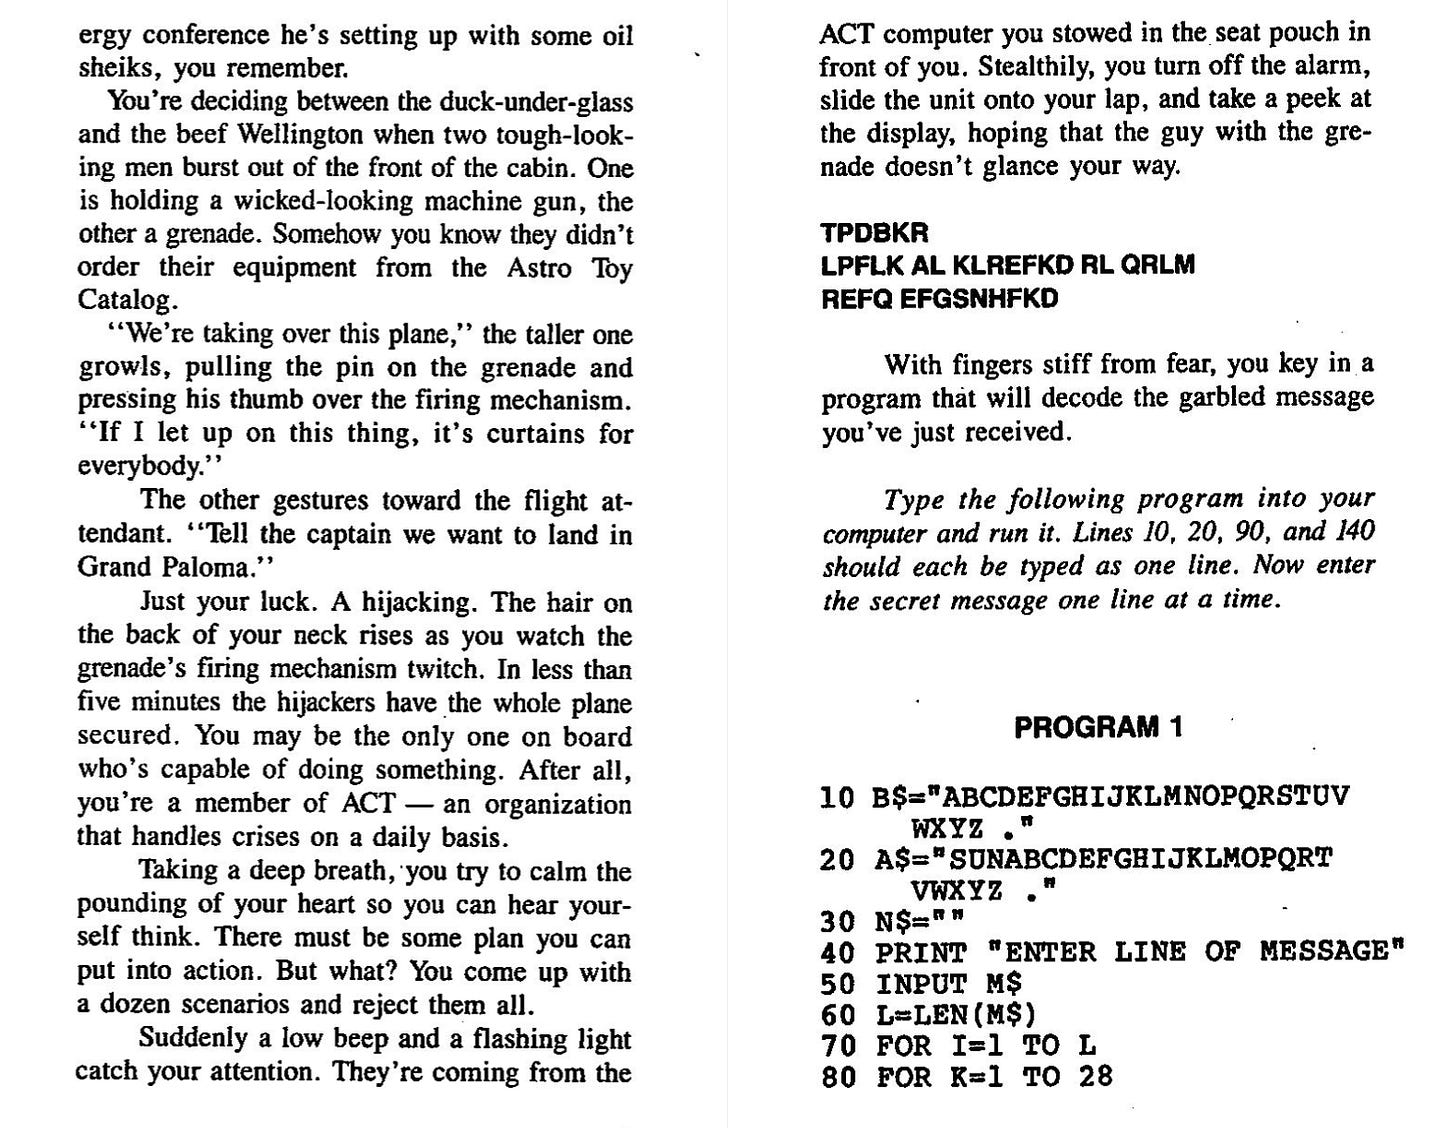 A page scan from a Micro Adventure book has prose describing the young heroes discovering a secret code, followed by a BASIC program the reader is invited to type in to decode the message.